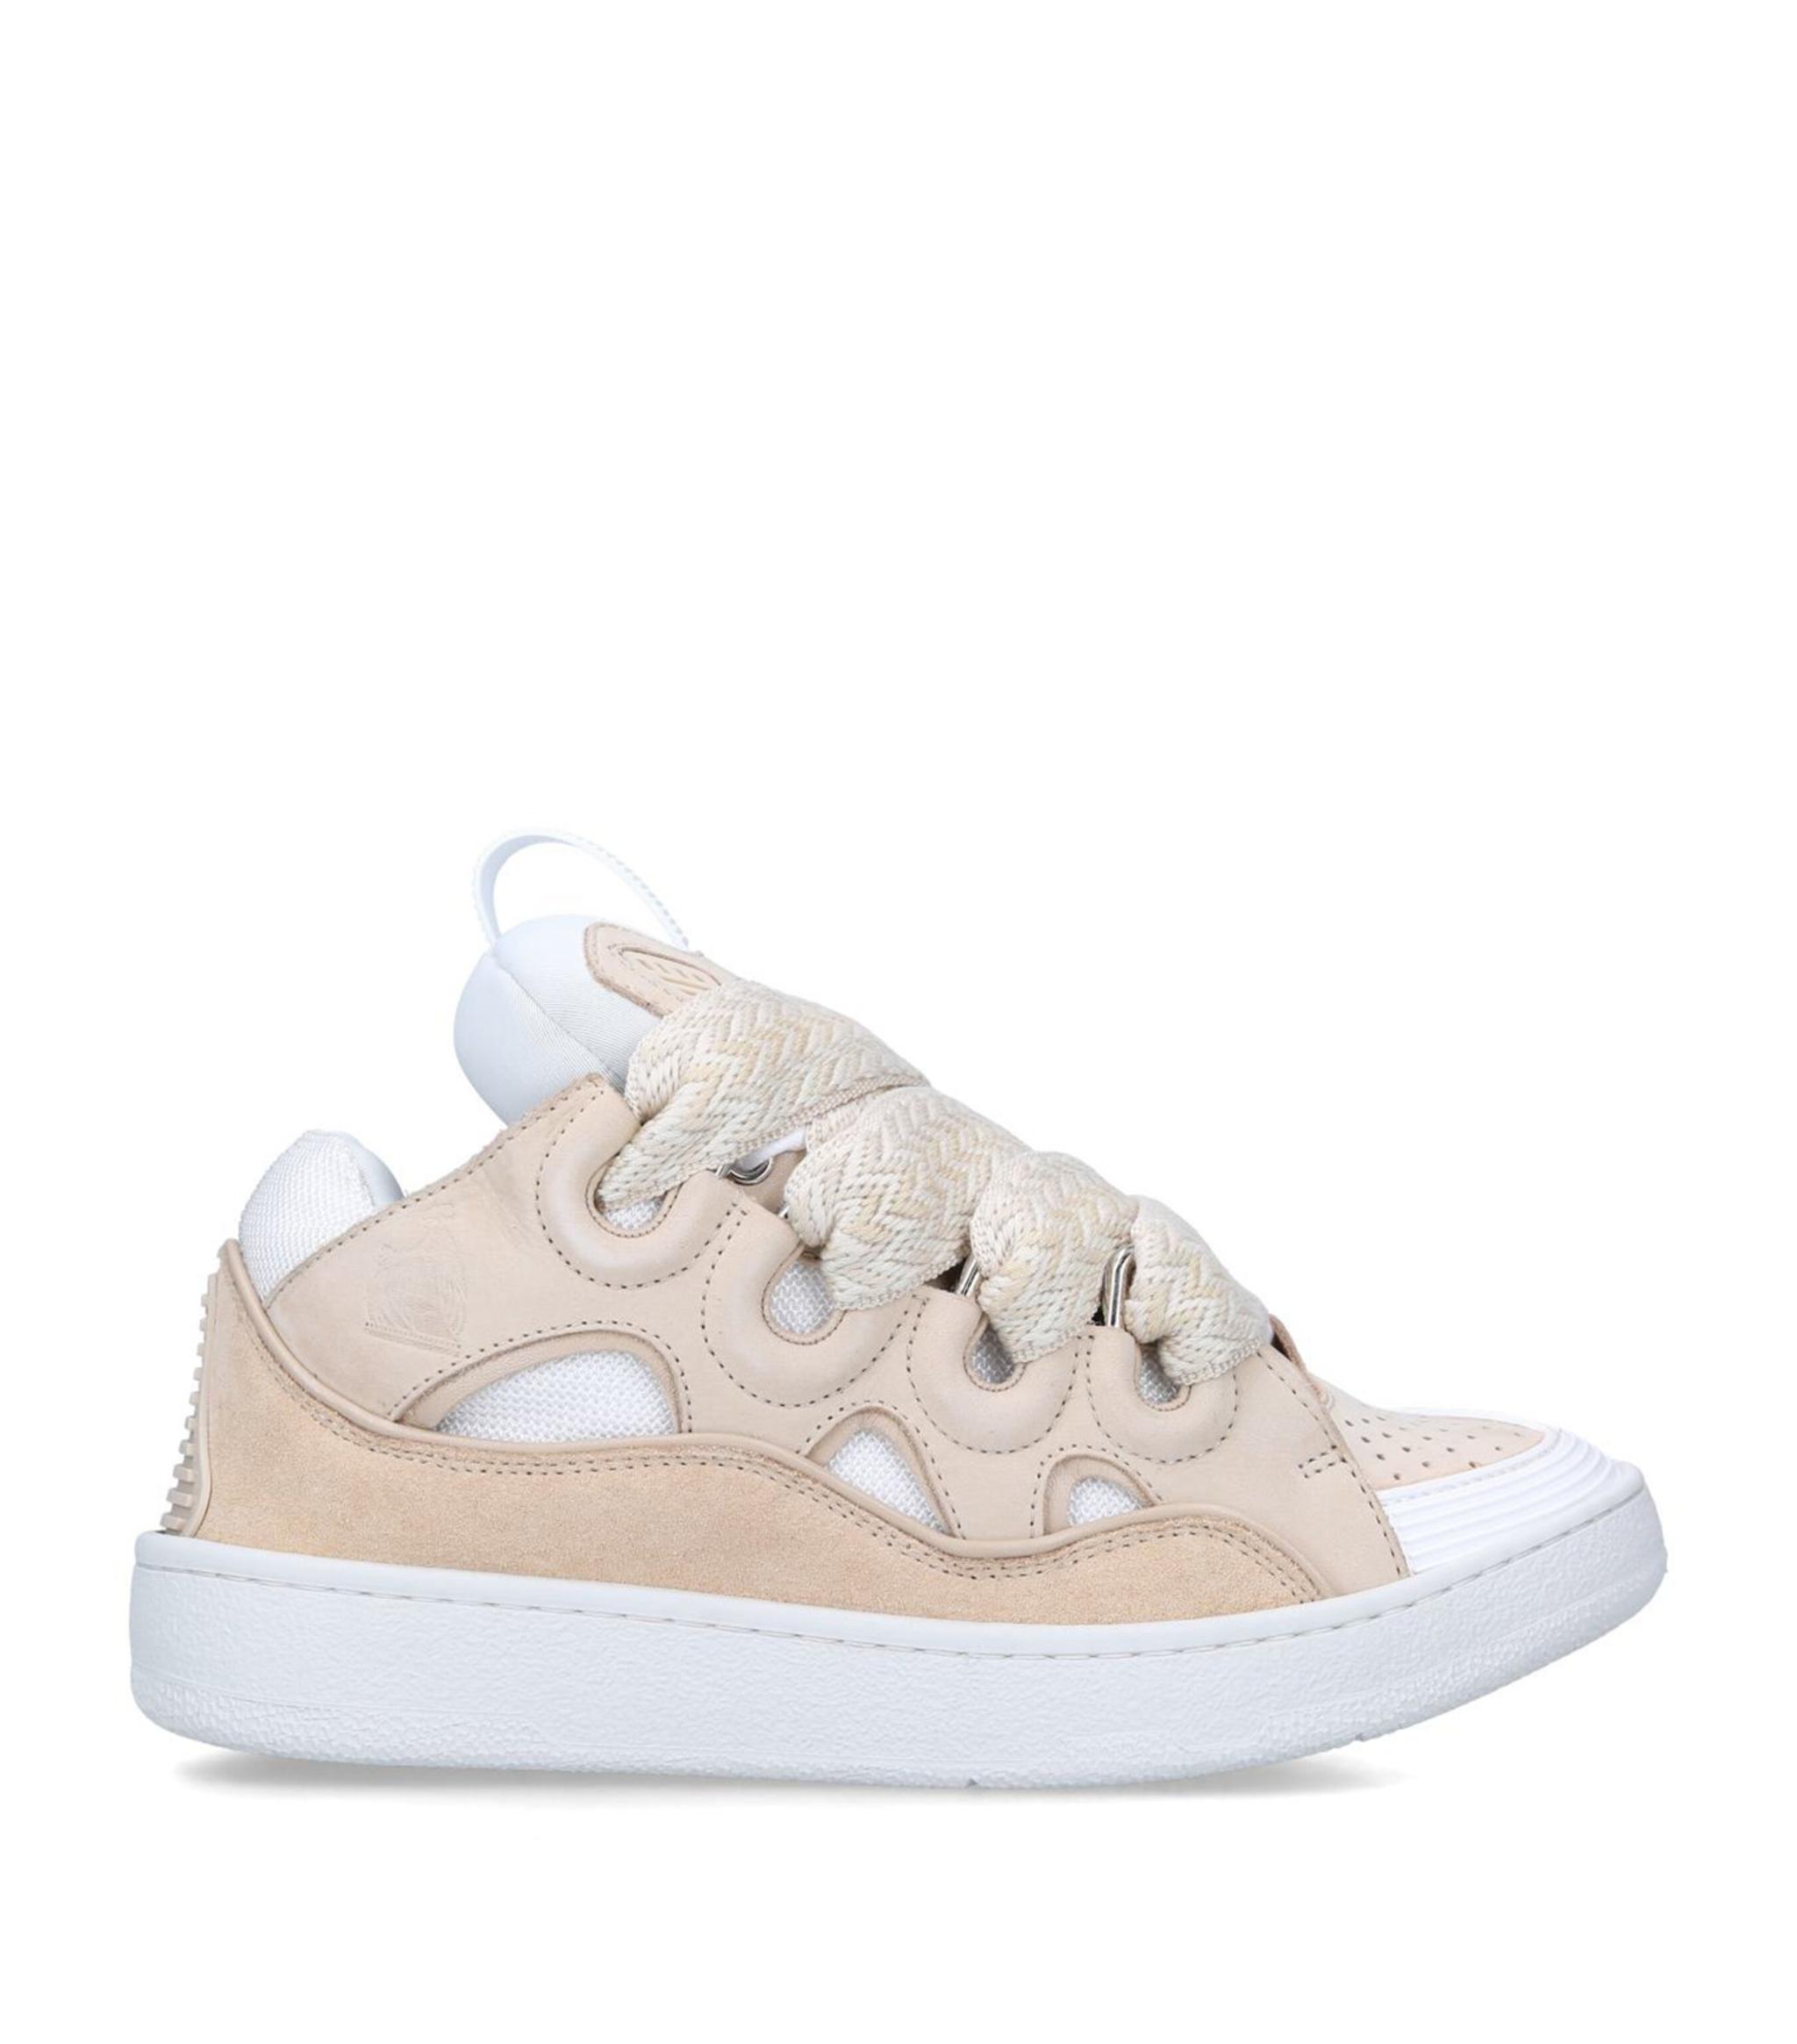 Lanvin Leather Curb Sneakers in White | Lyst